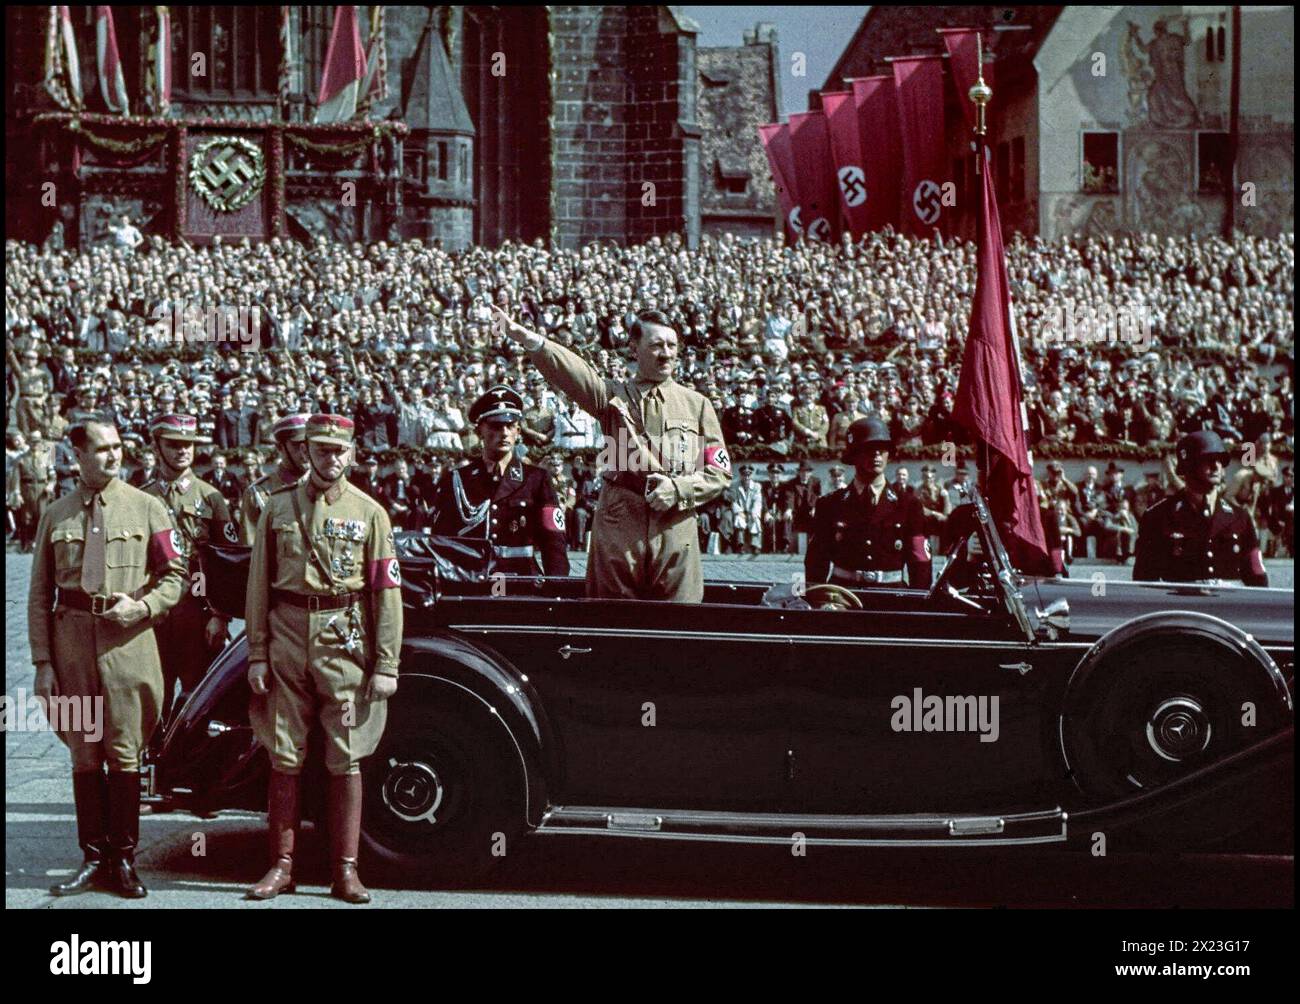 1930s Adolf Hitler in Sturmbleitung uniform standing in the back of his open top Mercedes car, a rare colour image of Hitler giving a Heil Hitler salute to the passing Sturmbleitung paramilitary army marching past. Rudolf Hess featured on left by Mercedes car.  Nurnberg Nuremberg Rally Nazi Gemany 1930s Leibstandarte SS Adolf Hitler ('Life Guards SS Adolf Hitler'; LSSAH)  an elite SS protection unit behind Stock Photo